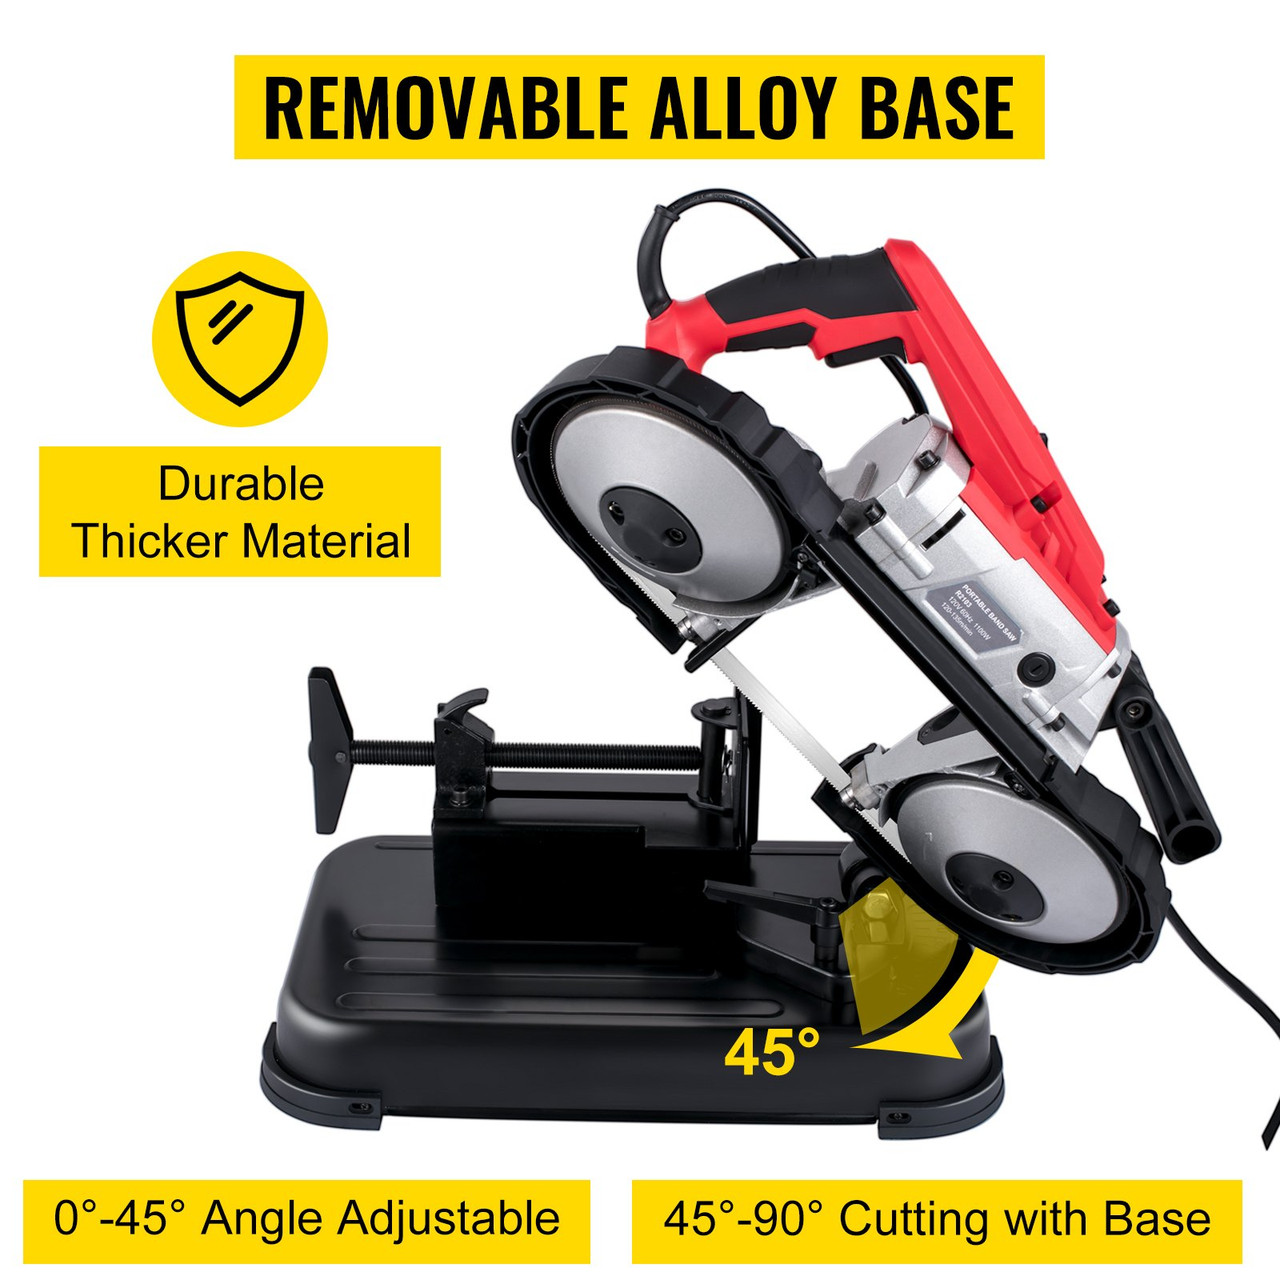 Portable Band Saw, 110V Removable Alloy Steel Base Cordless Band Saw, 5 Inch Cutting Capacity Hand held Band Saw,Variable Speed Portable Bandsaw, 10Amp Motor Deep Cut Band saw for Metal Wood